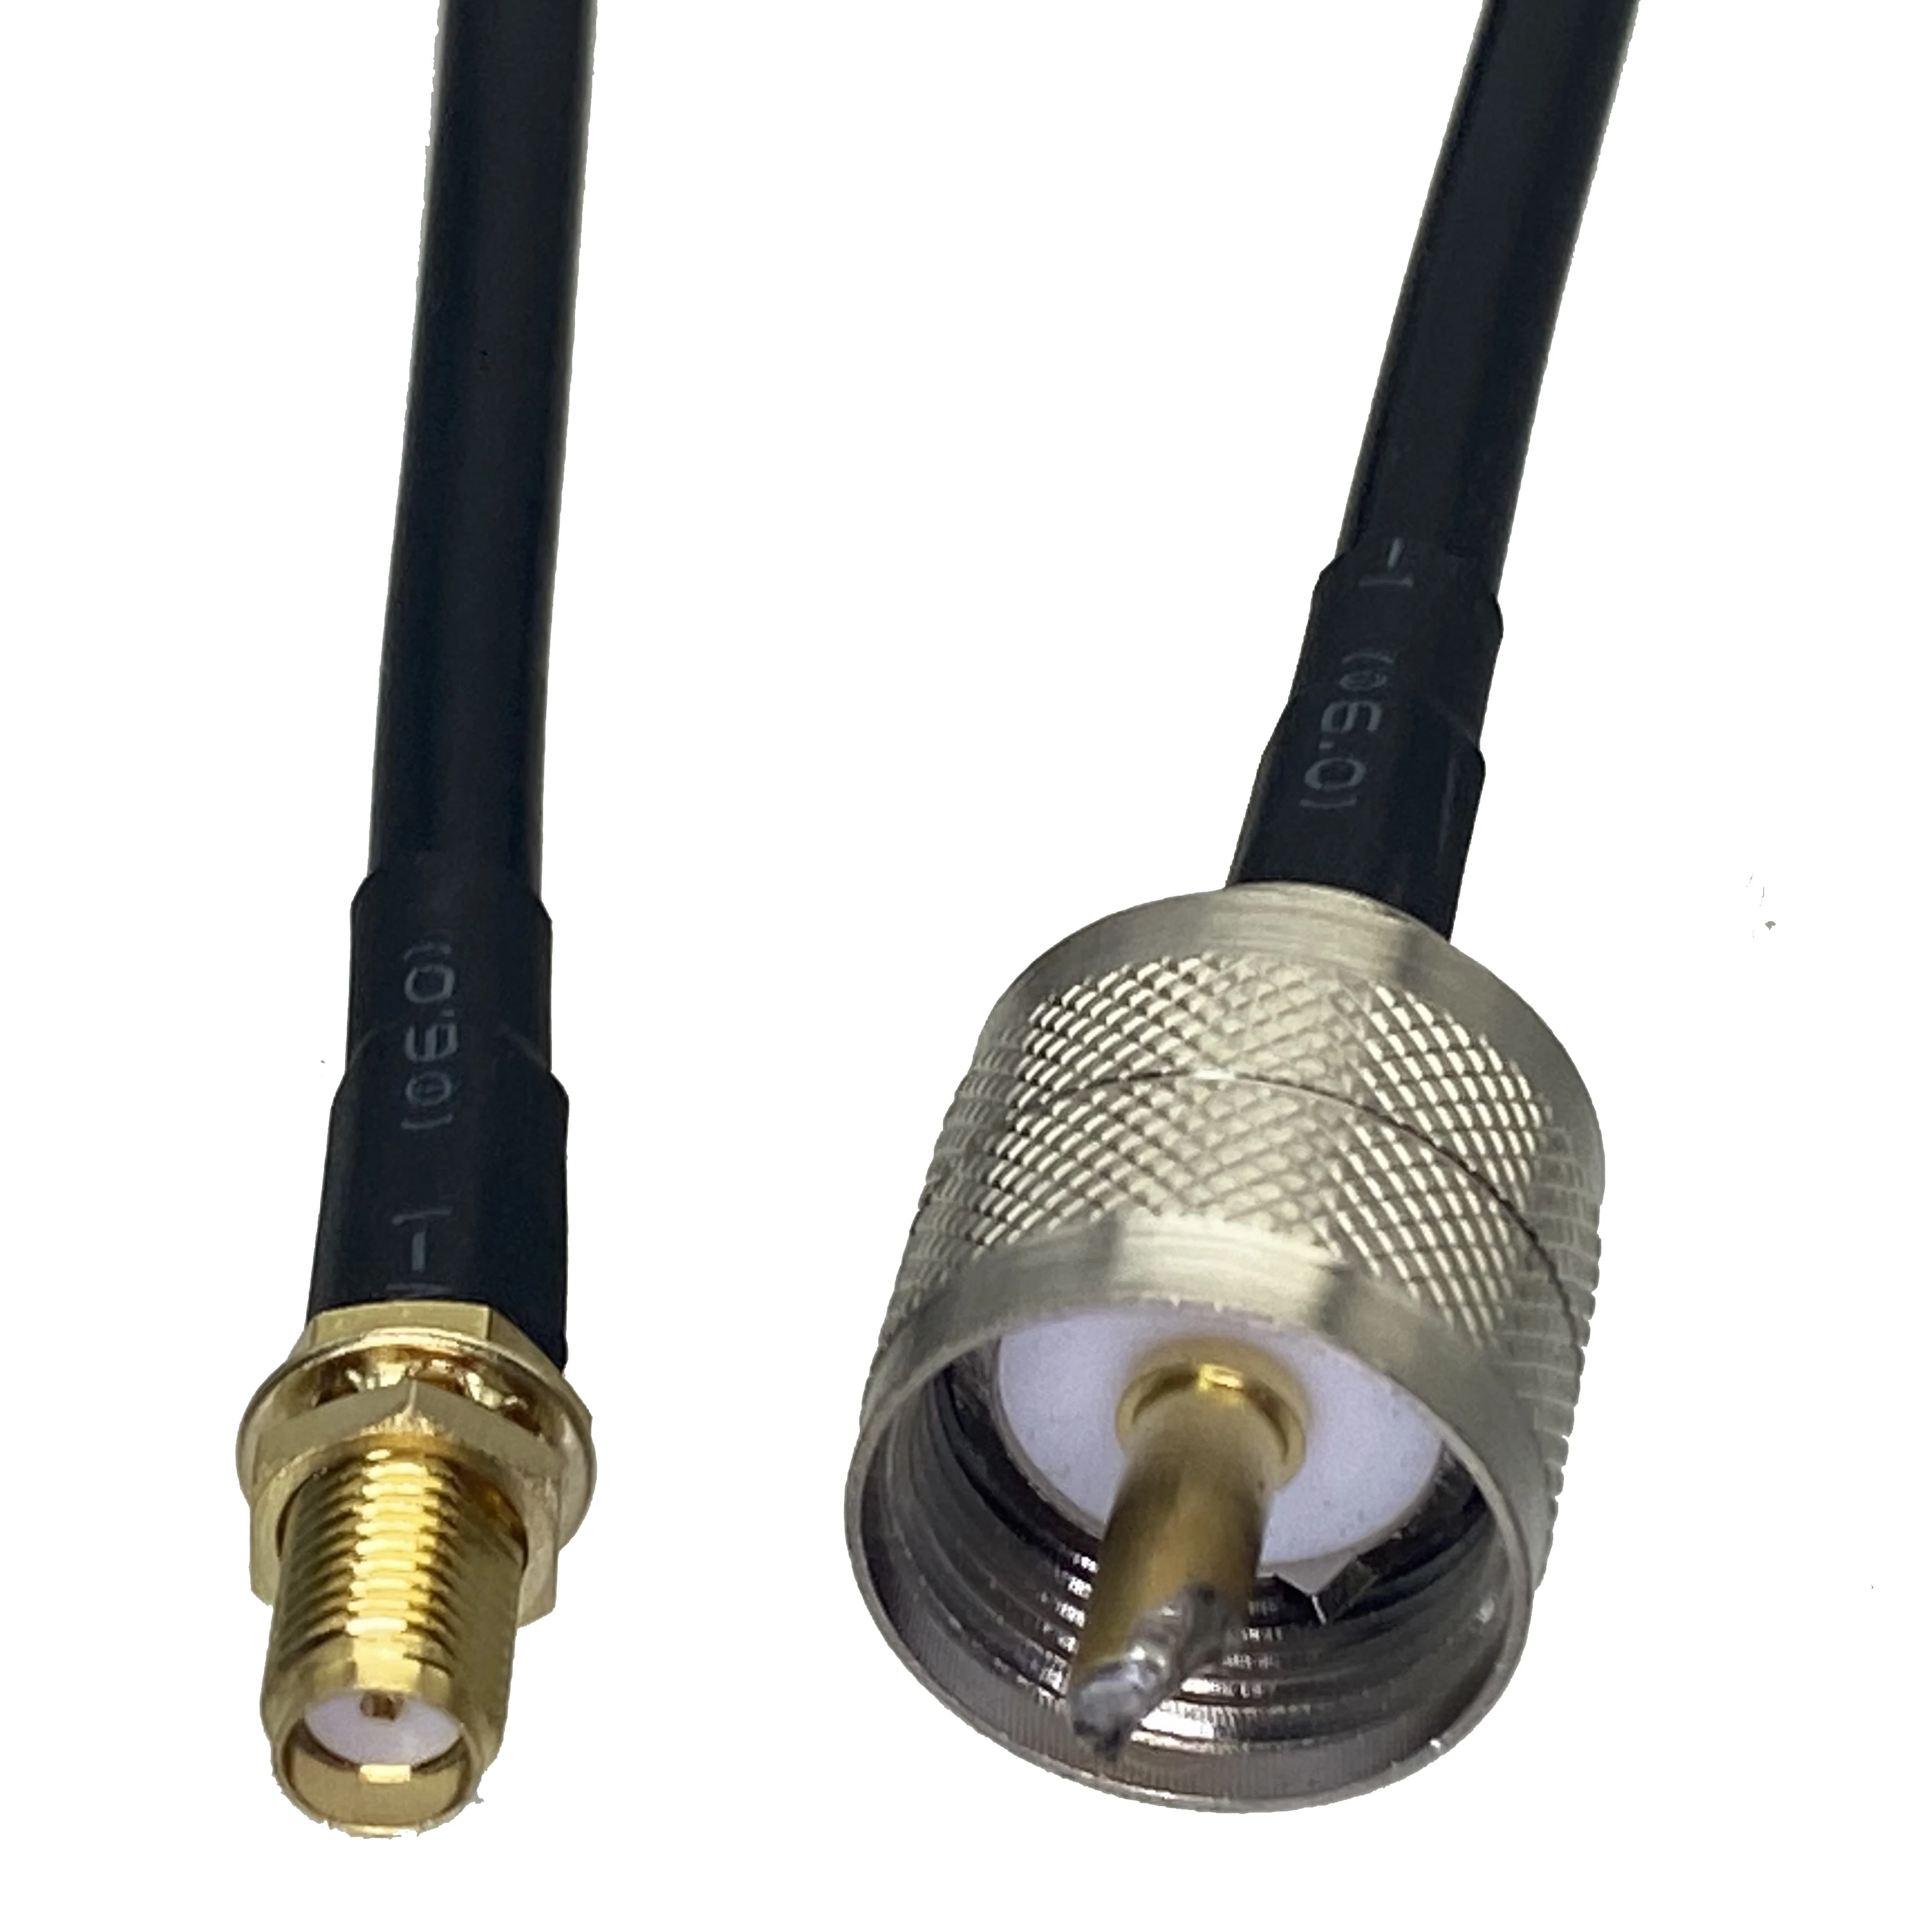 

1pcs RG58 Cable UHF PL259 Male Plug to SMA Female Jack Bulkhead Nut Connector RF Coaxial Pigtail Jumper Adapter New 6inch~20M